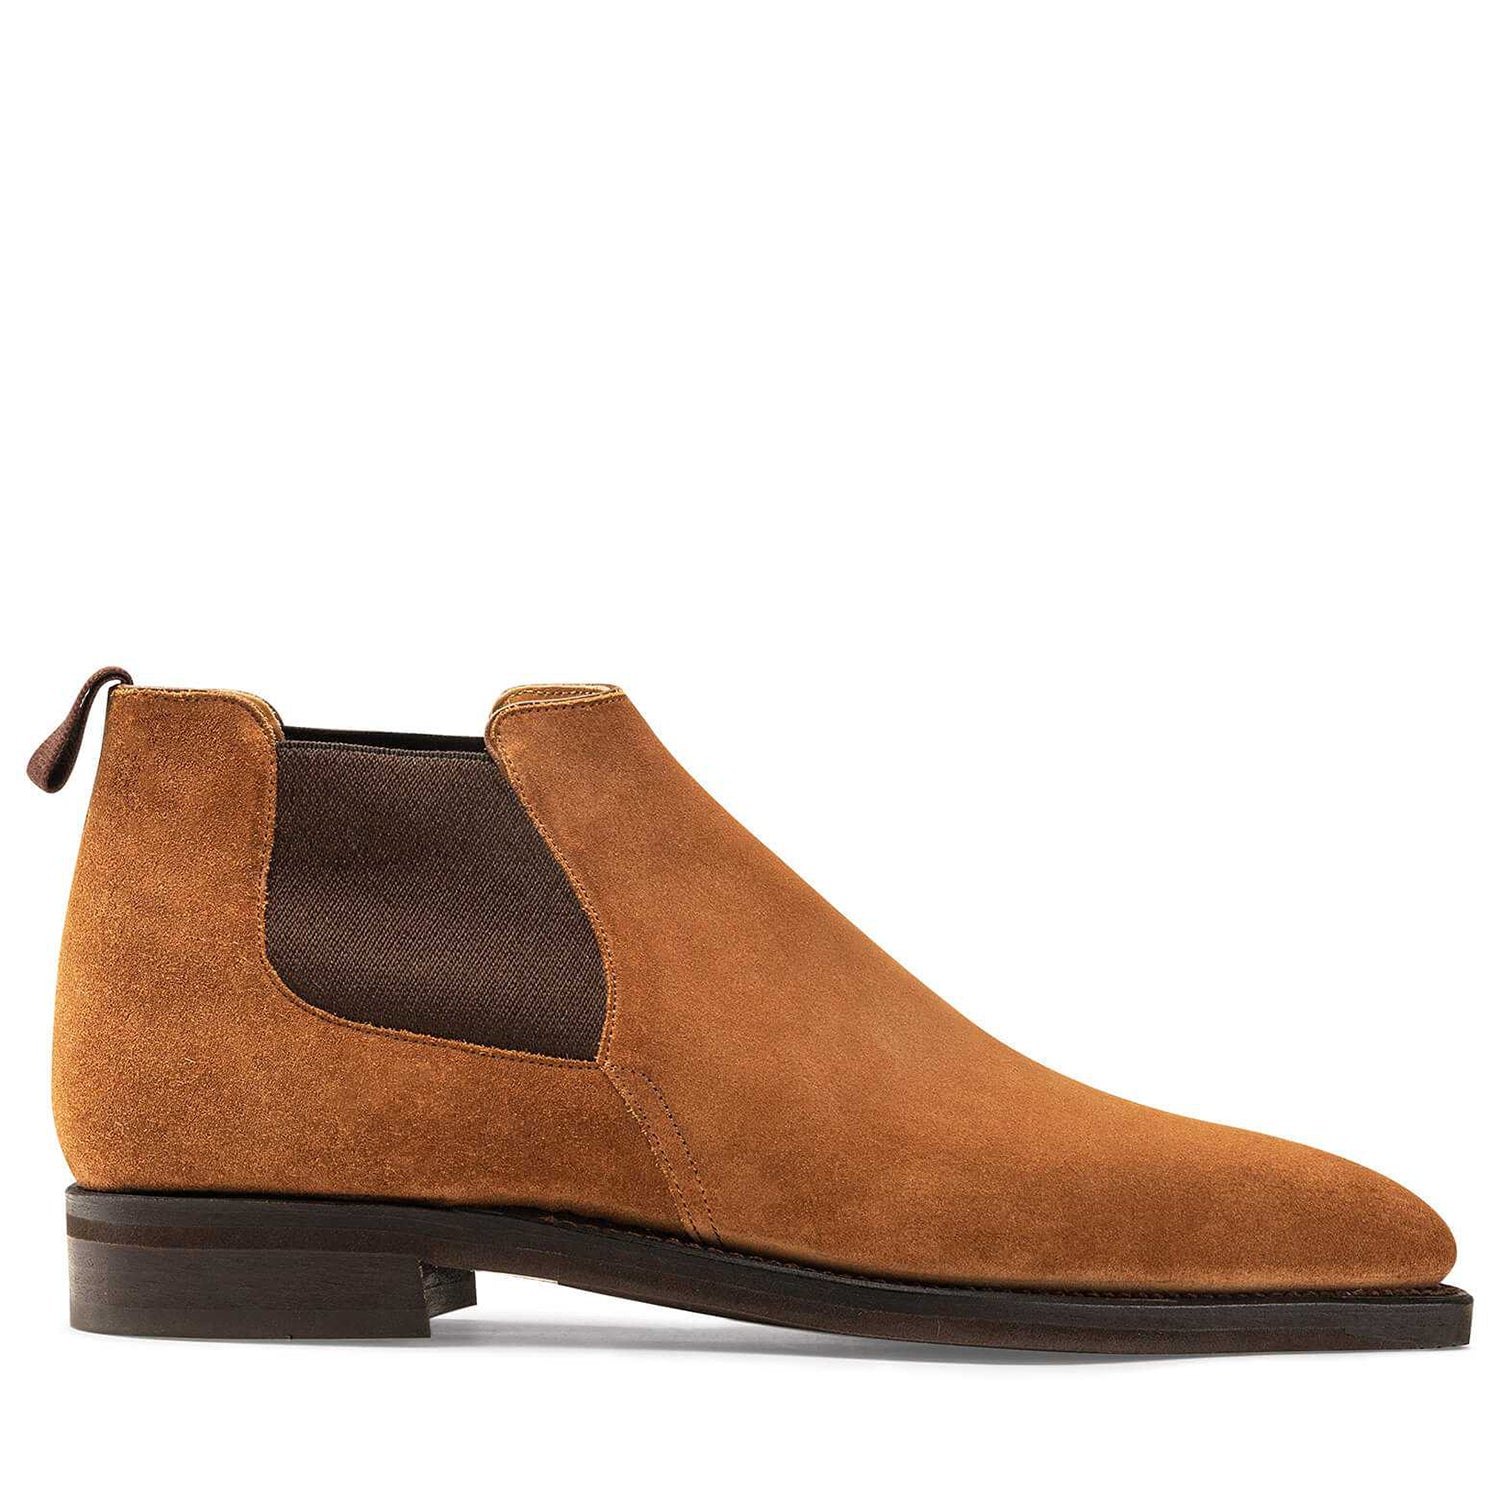 CASTOR SUEDE CLAF LEATHER BOOTS